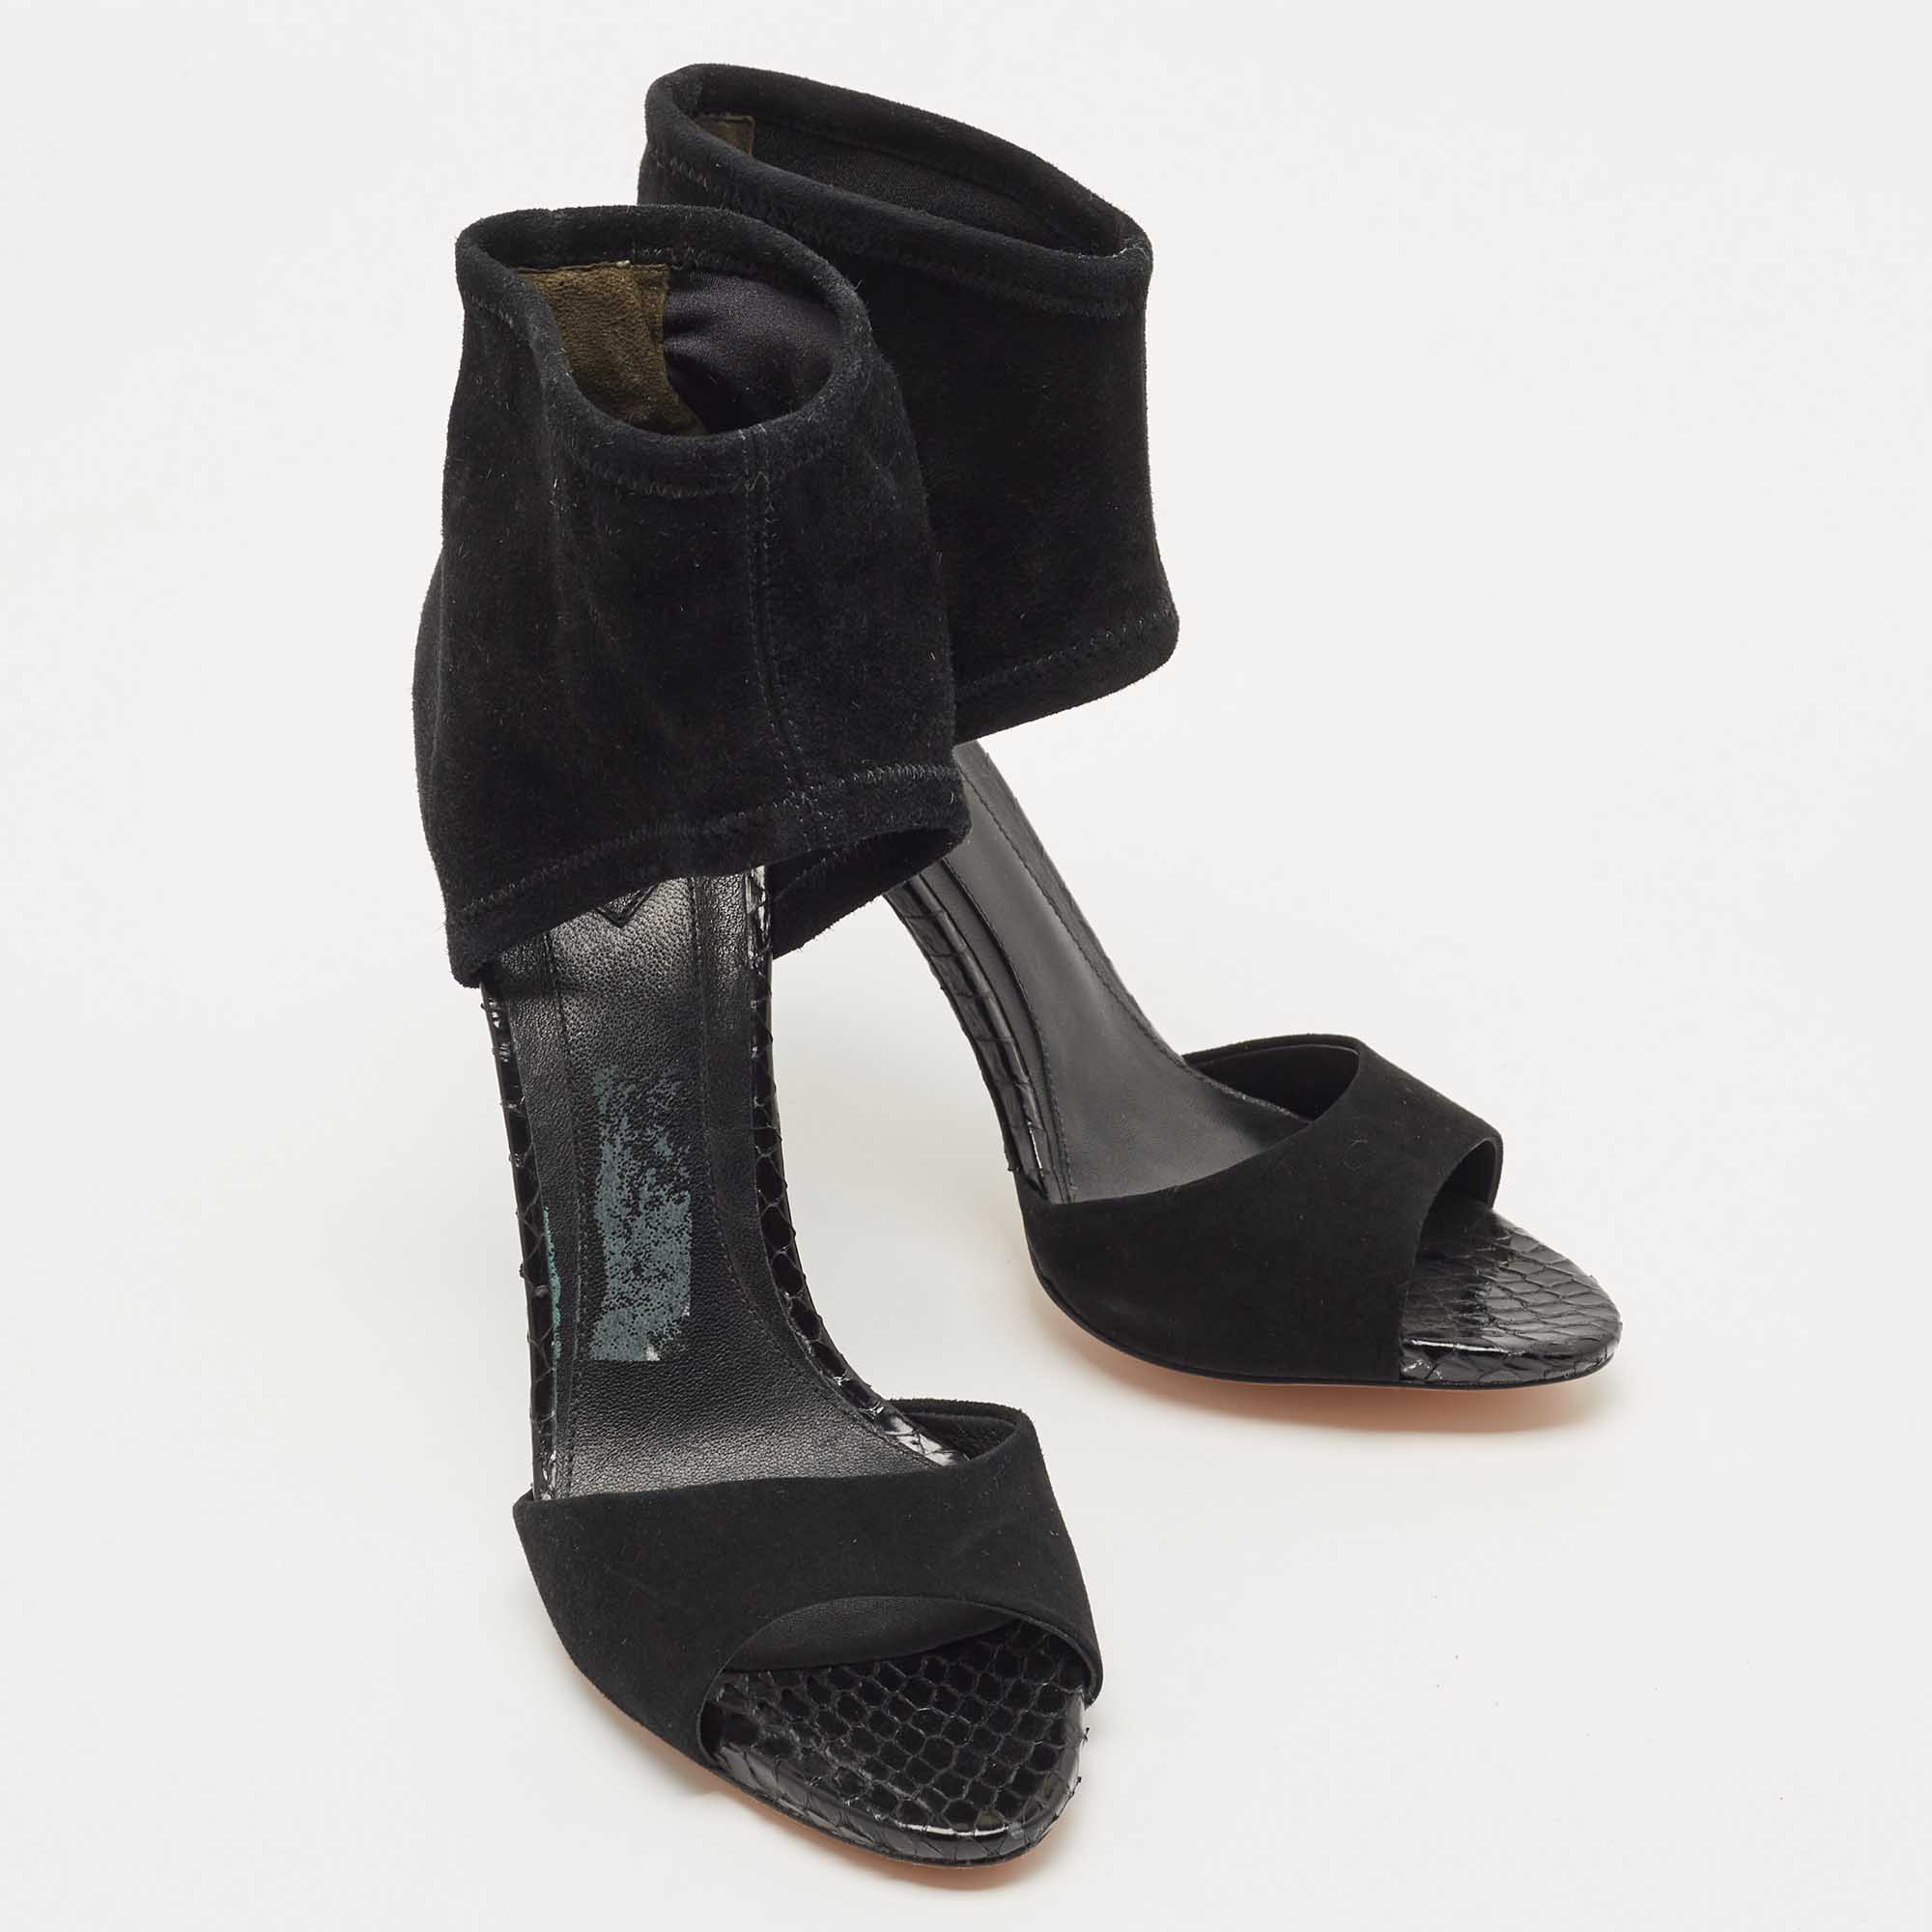 Brian Atwood Black Suede Correns Ankle Cuff Sandals Size 39.5